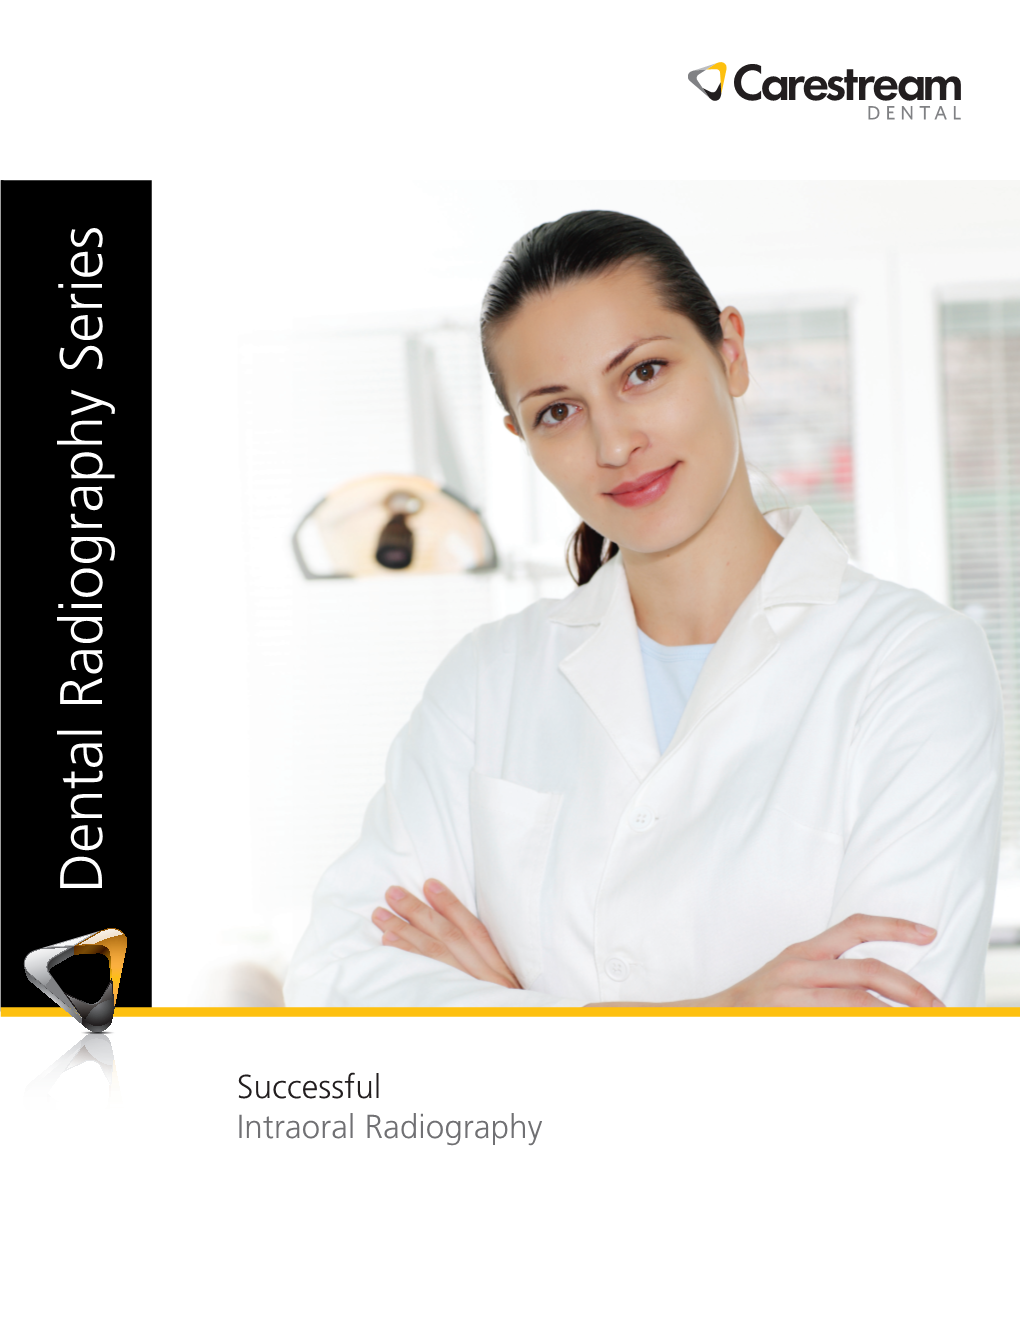 Dental Radiography Series Intraoral Radiography Successful